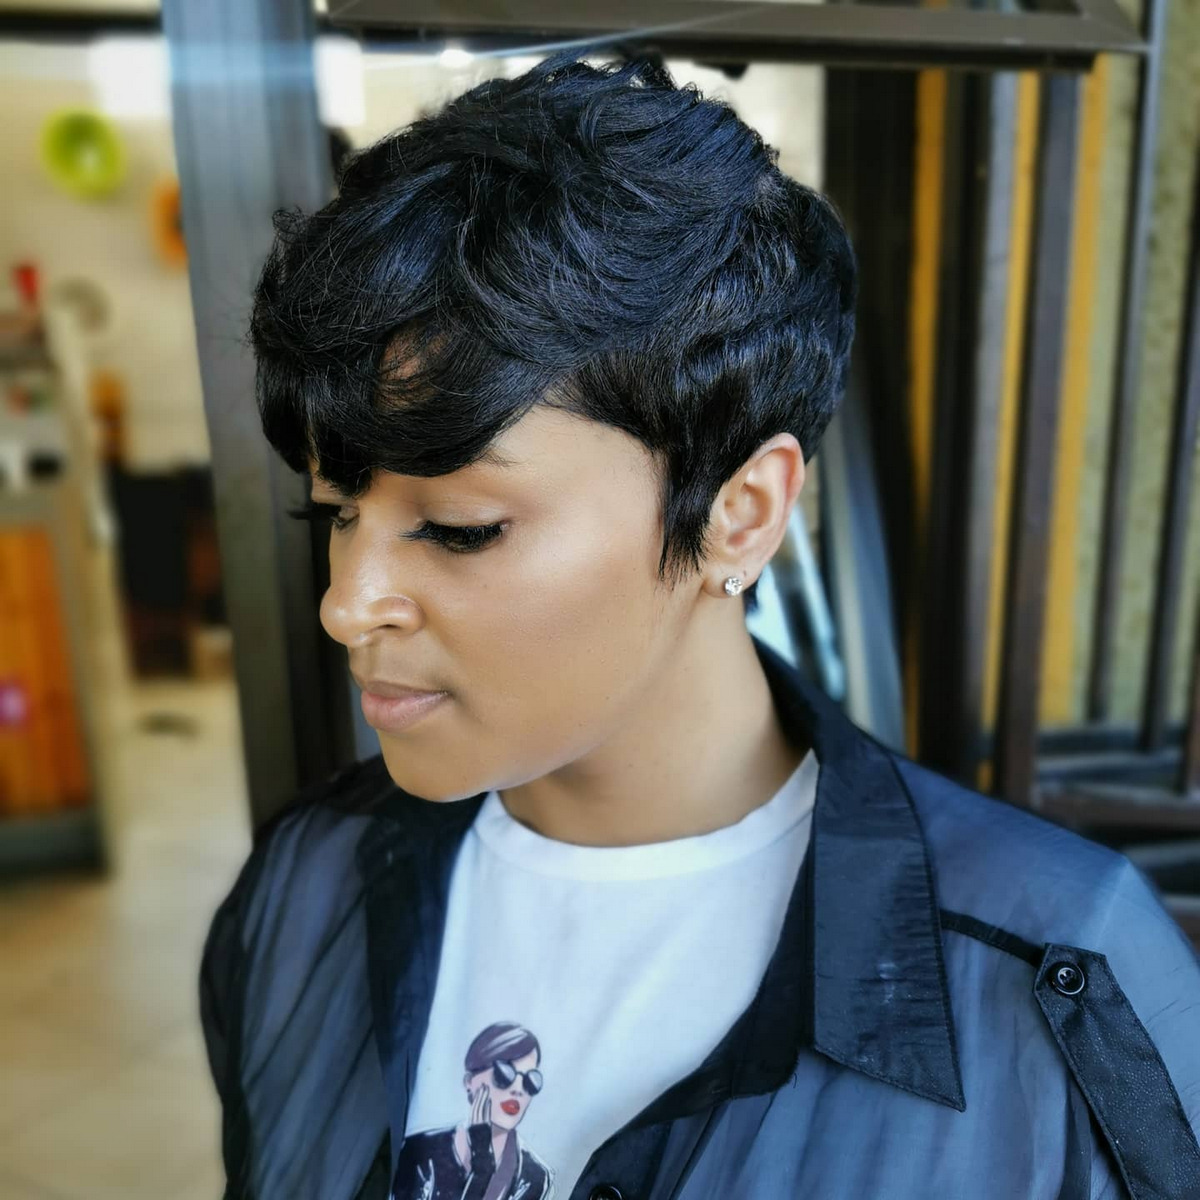 15 Short Curly Pixie Hairstyles  Pixie Cut  Haircut for 2019